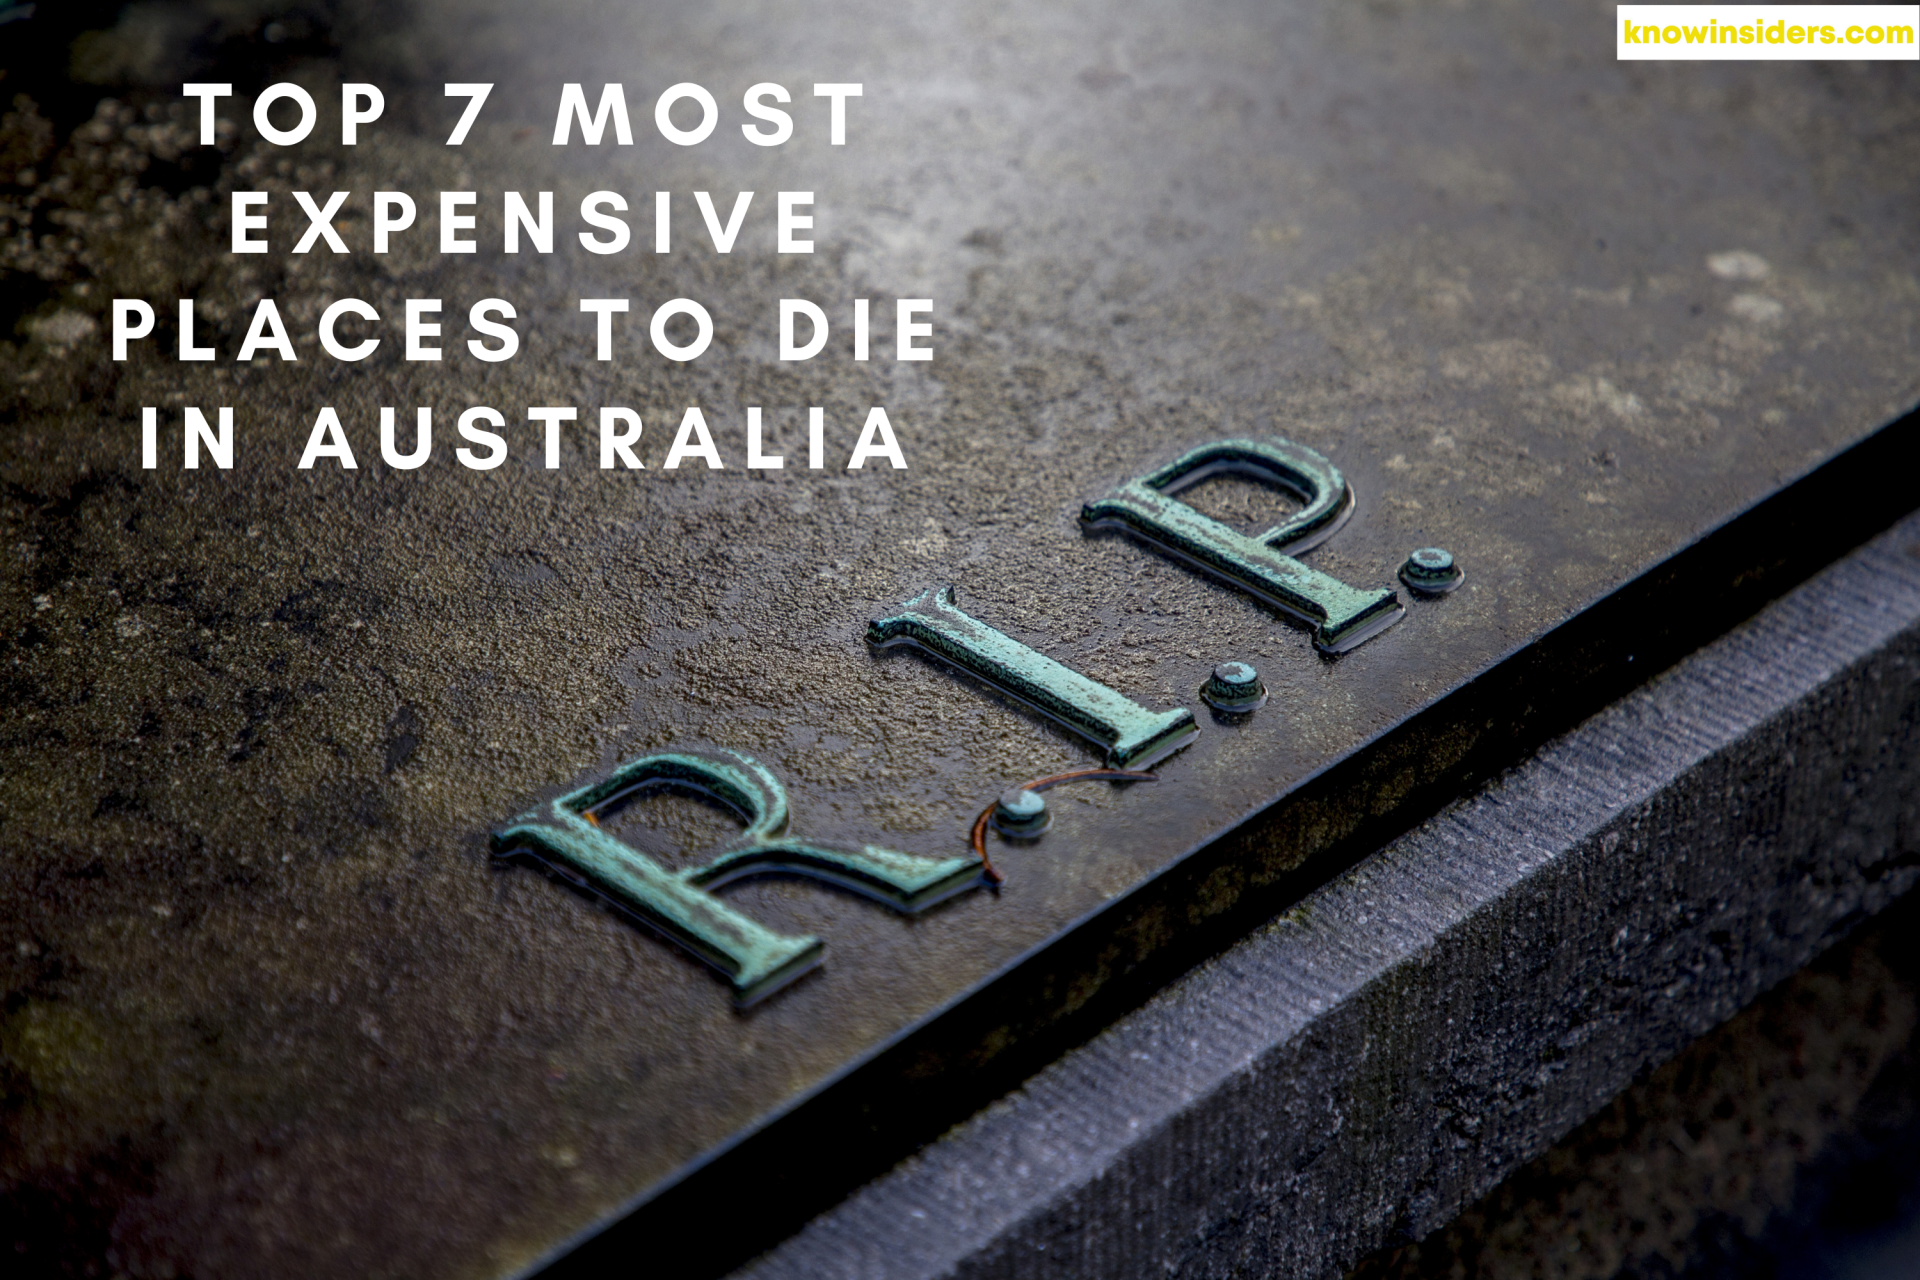 Funeral Costs in Australia: Top 7 Most Expensive Places To Die